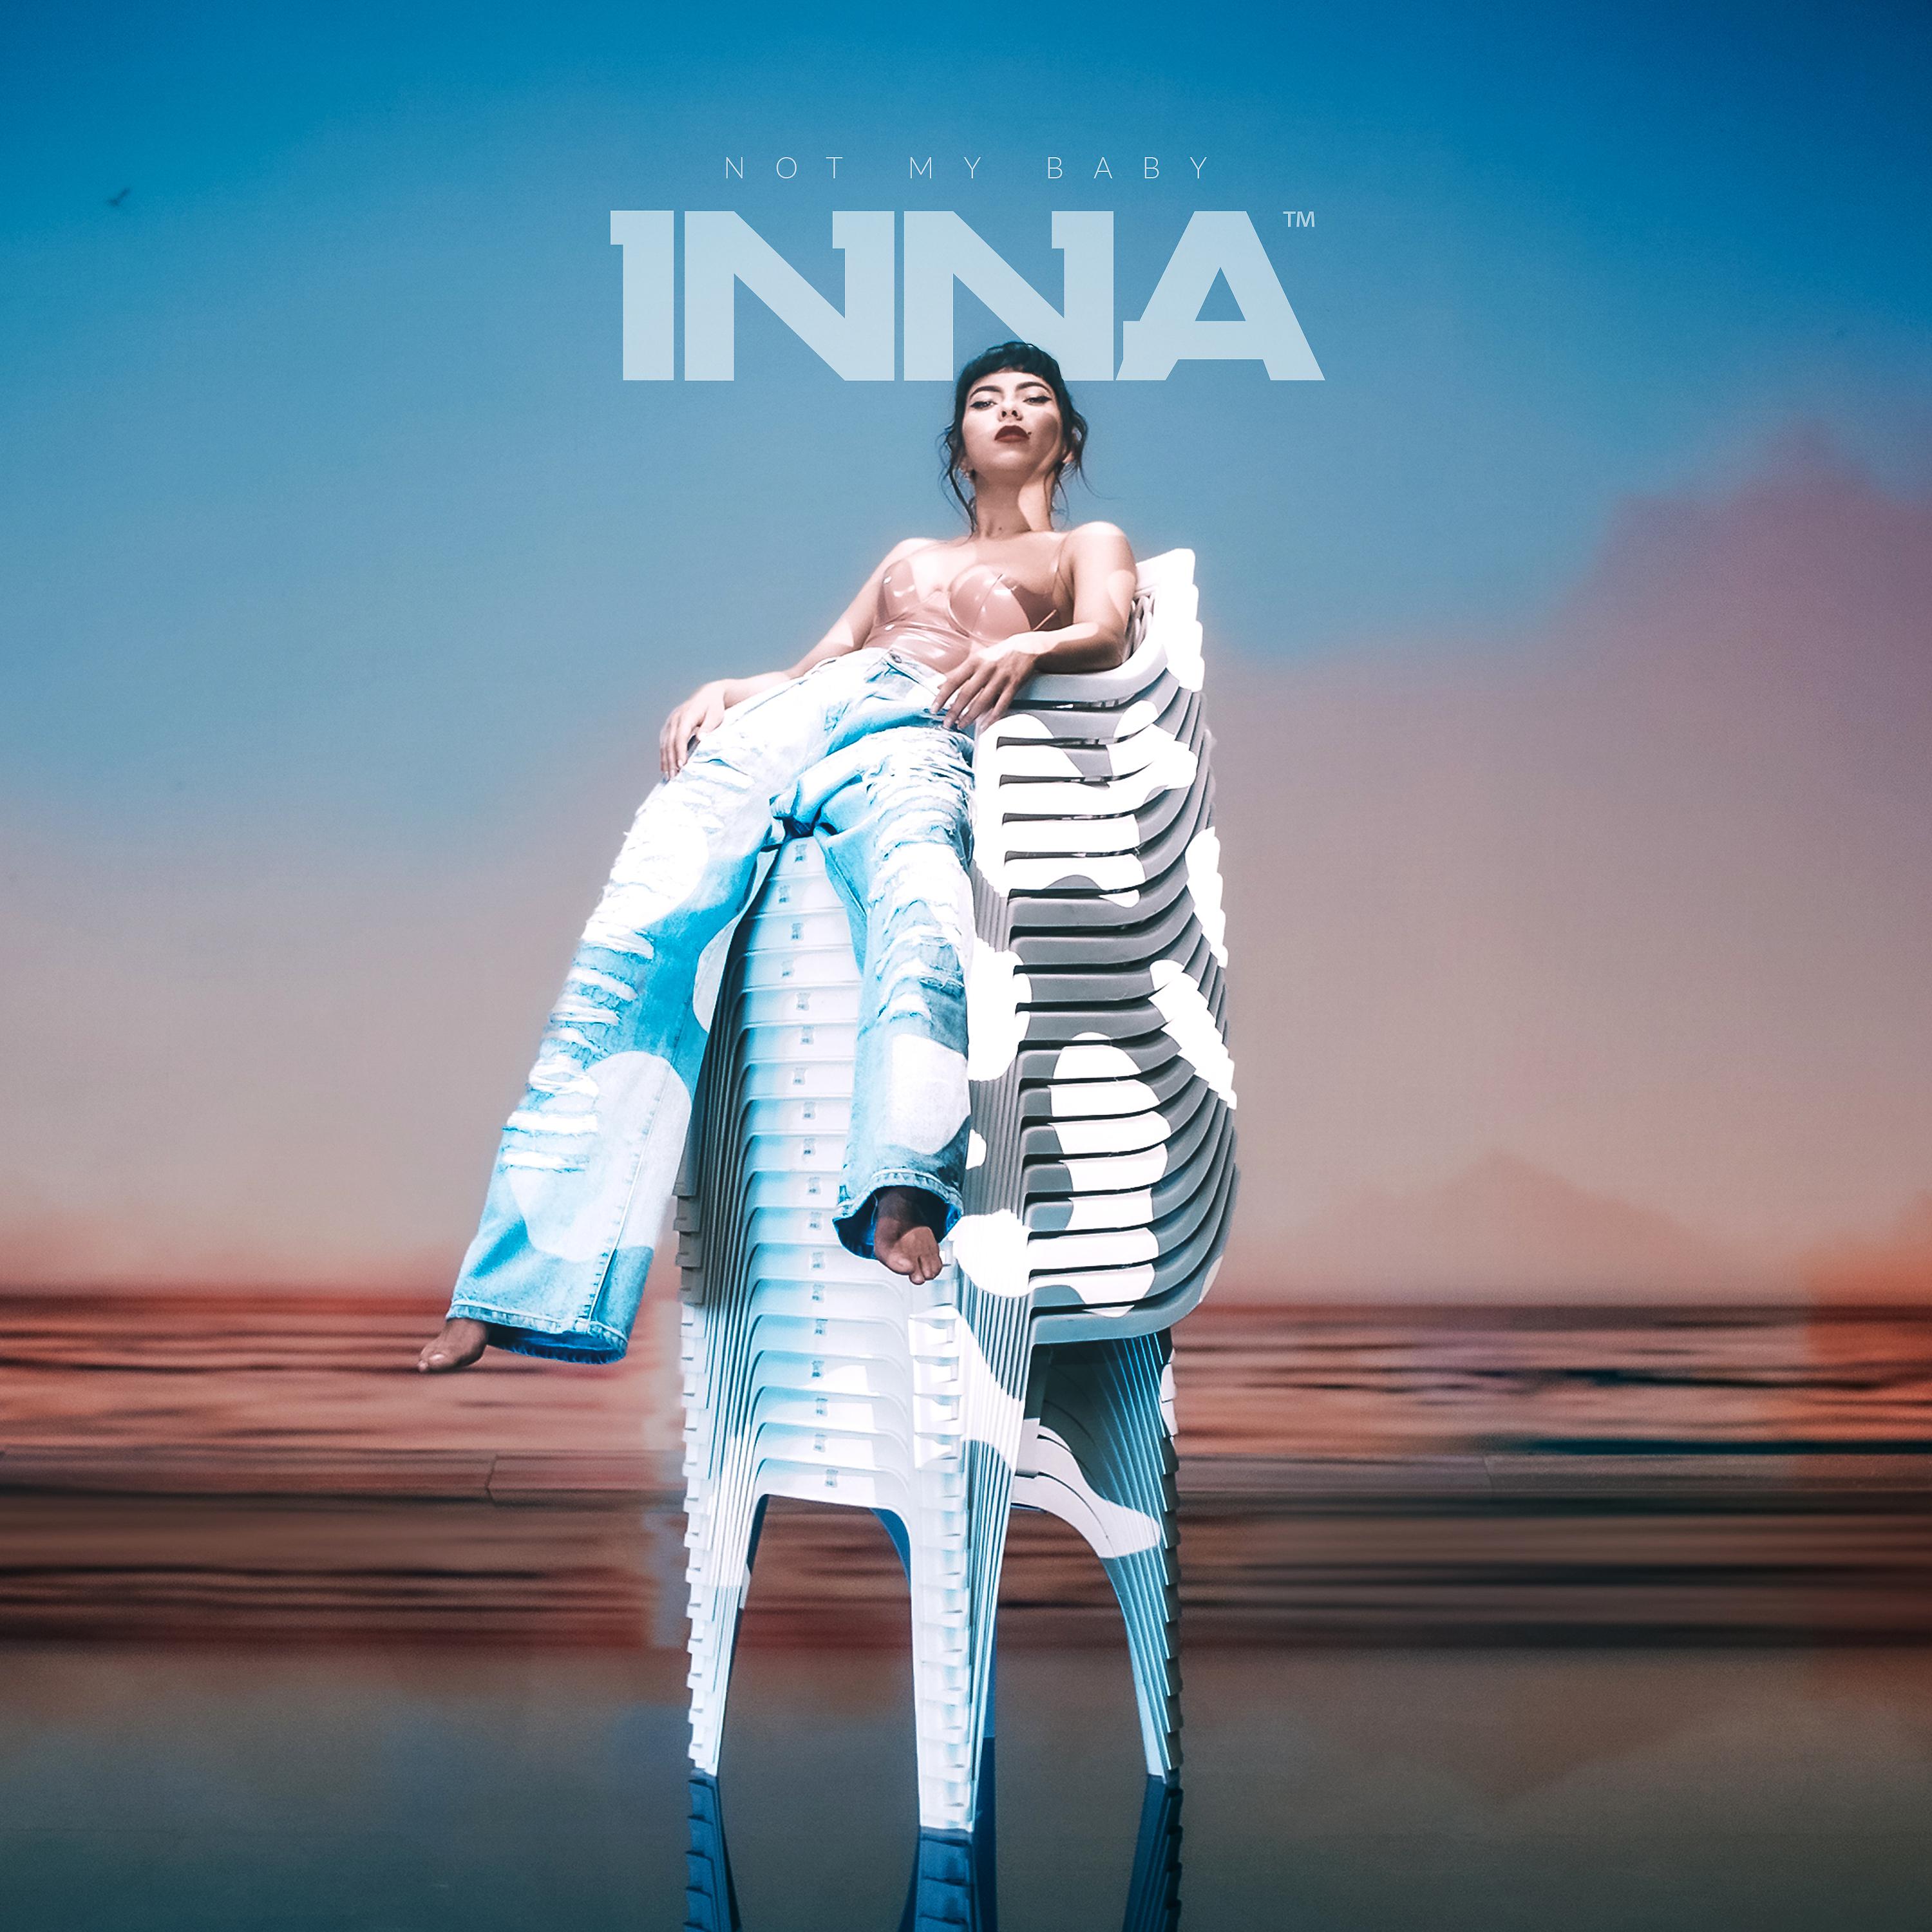 Baby come to me remix. Inna Baby. Инна not my Baby. Inna Single Cover. Inna Baby Remix.